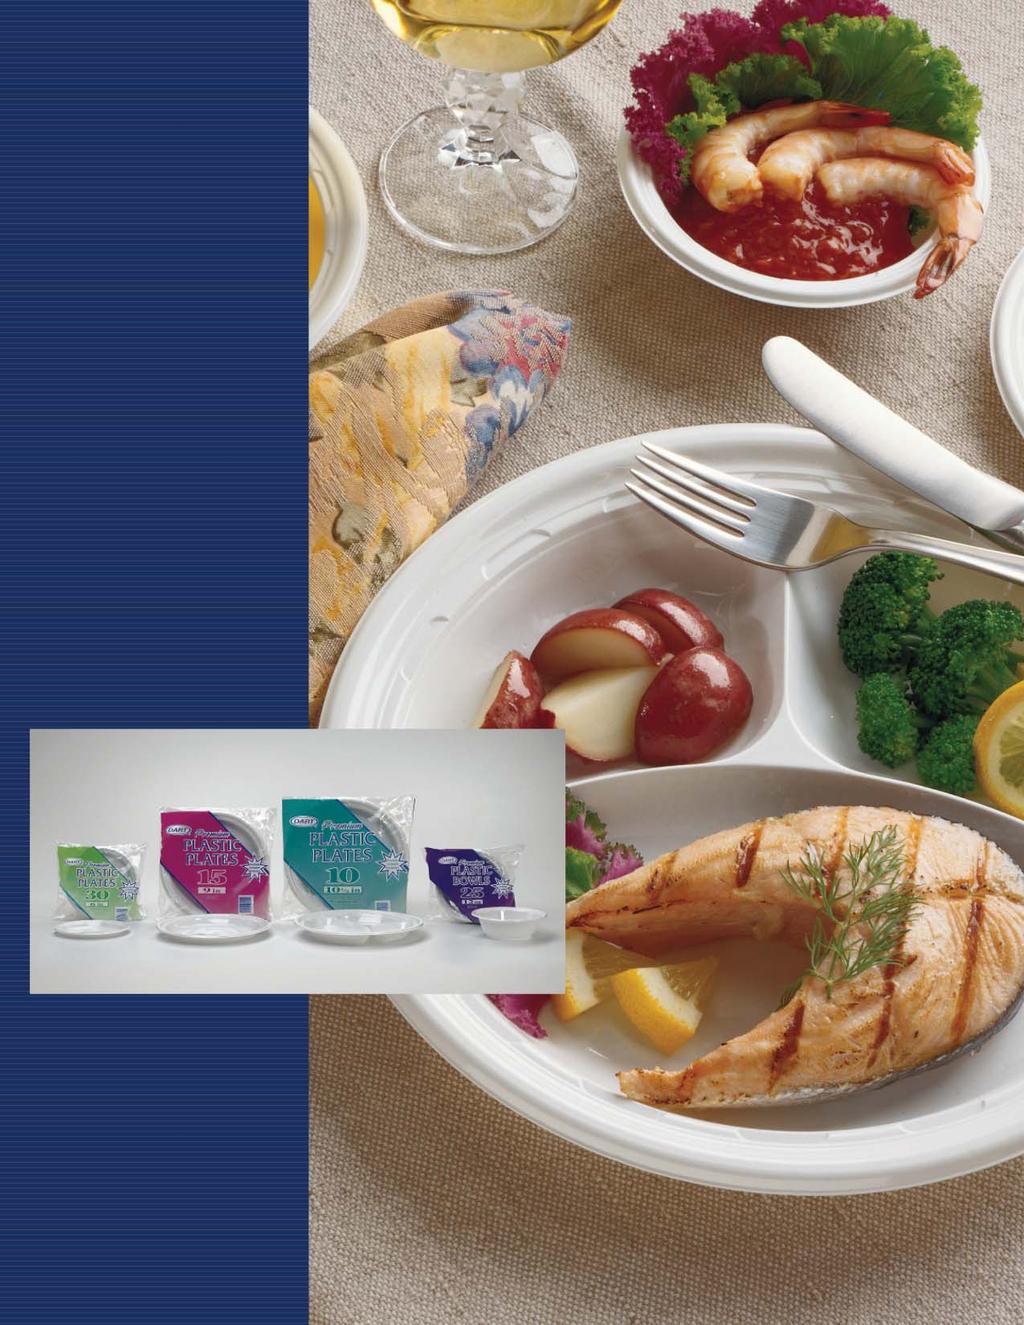 A favorite among consumers, Dart Plastic Dinnerware features a crystal cap layer for a china-like fi nish and increased strength.